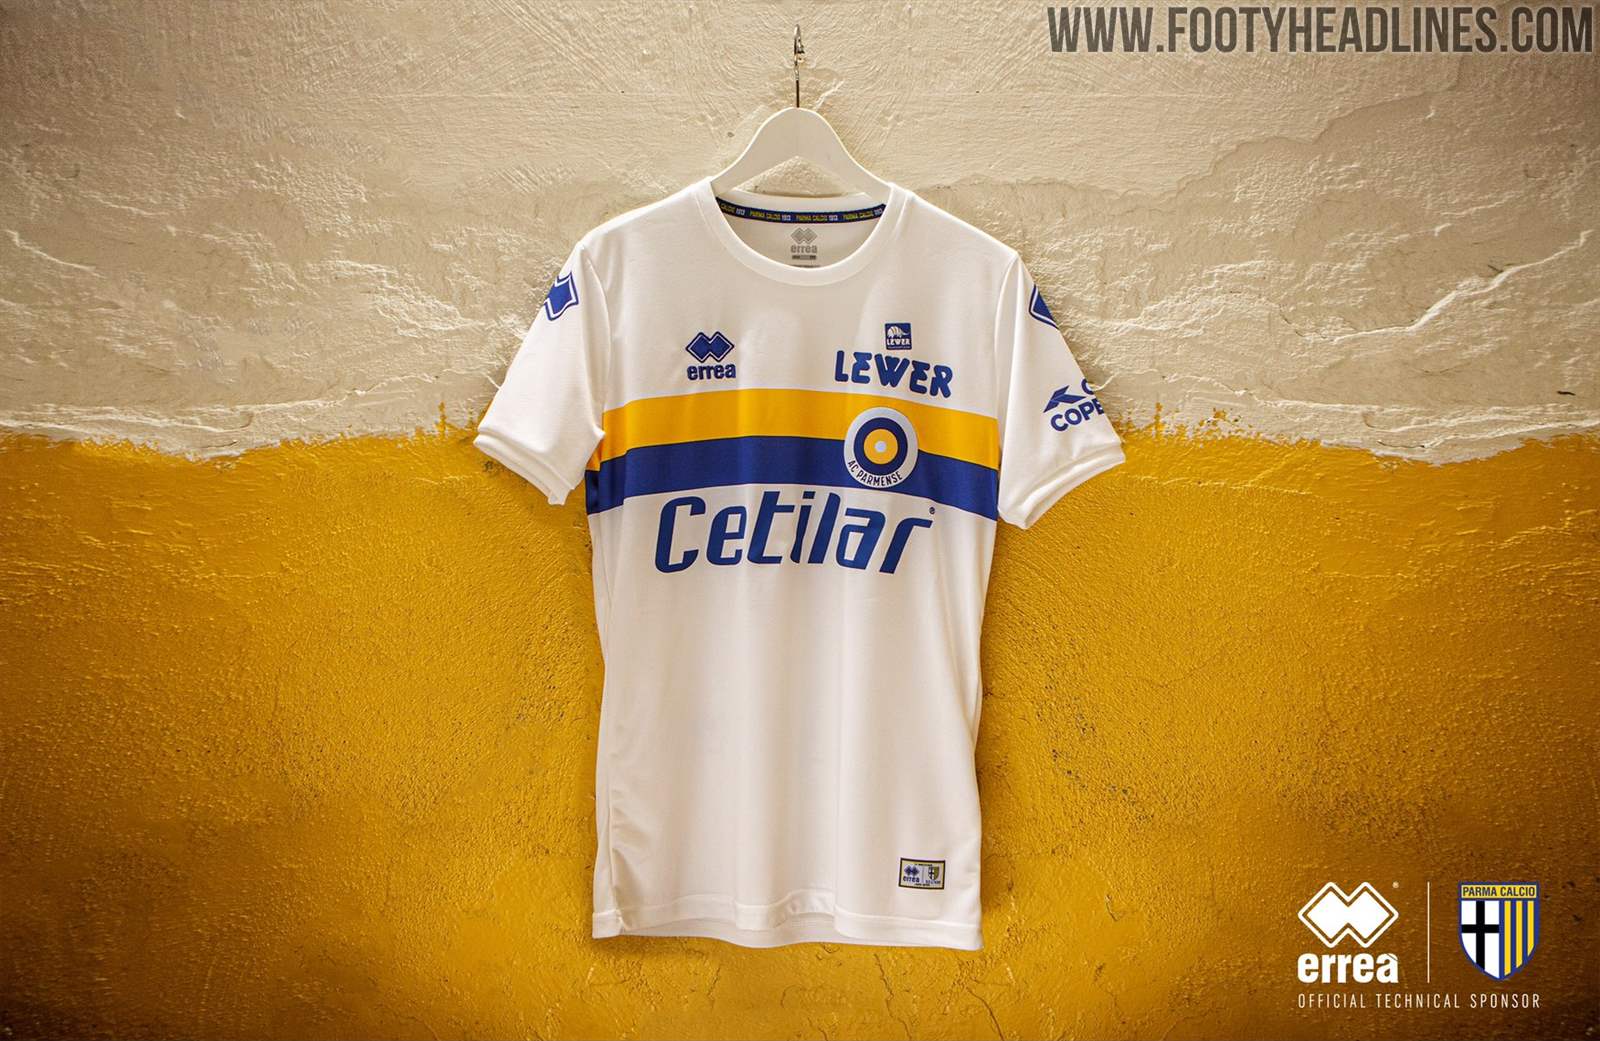 Classy Parma 19-20 Special-Edition Kit Released - Footy Headlines